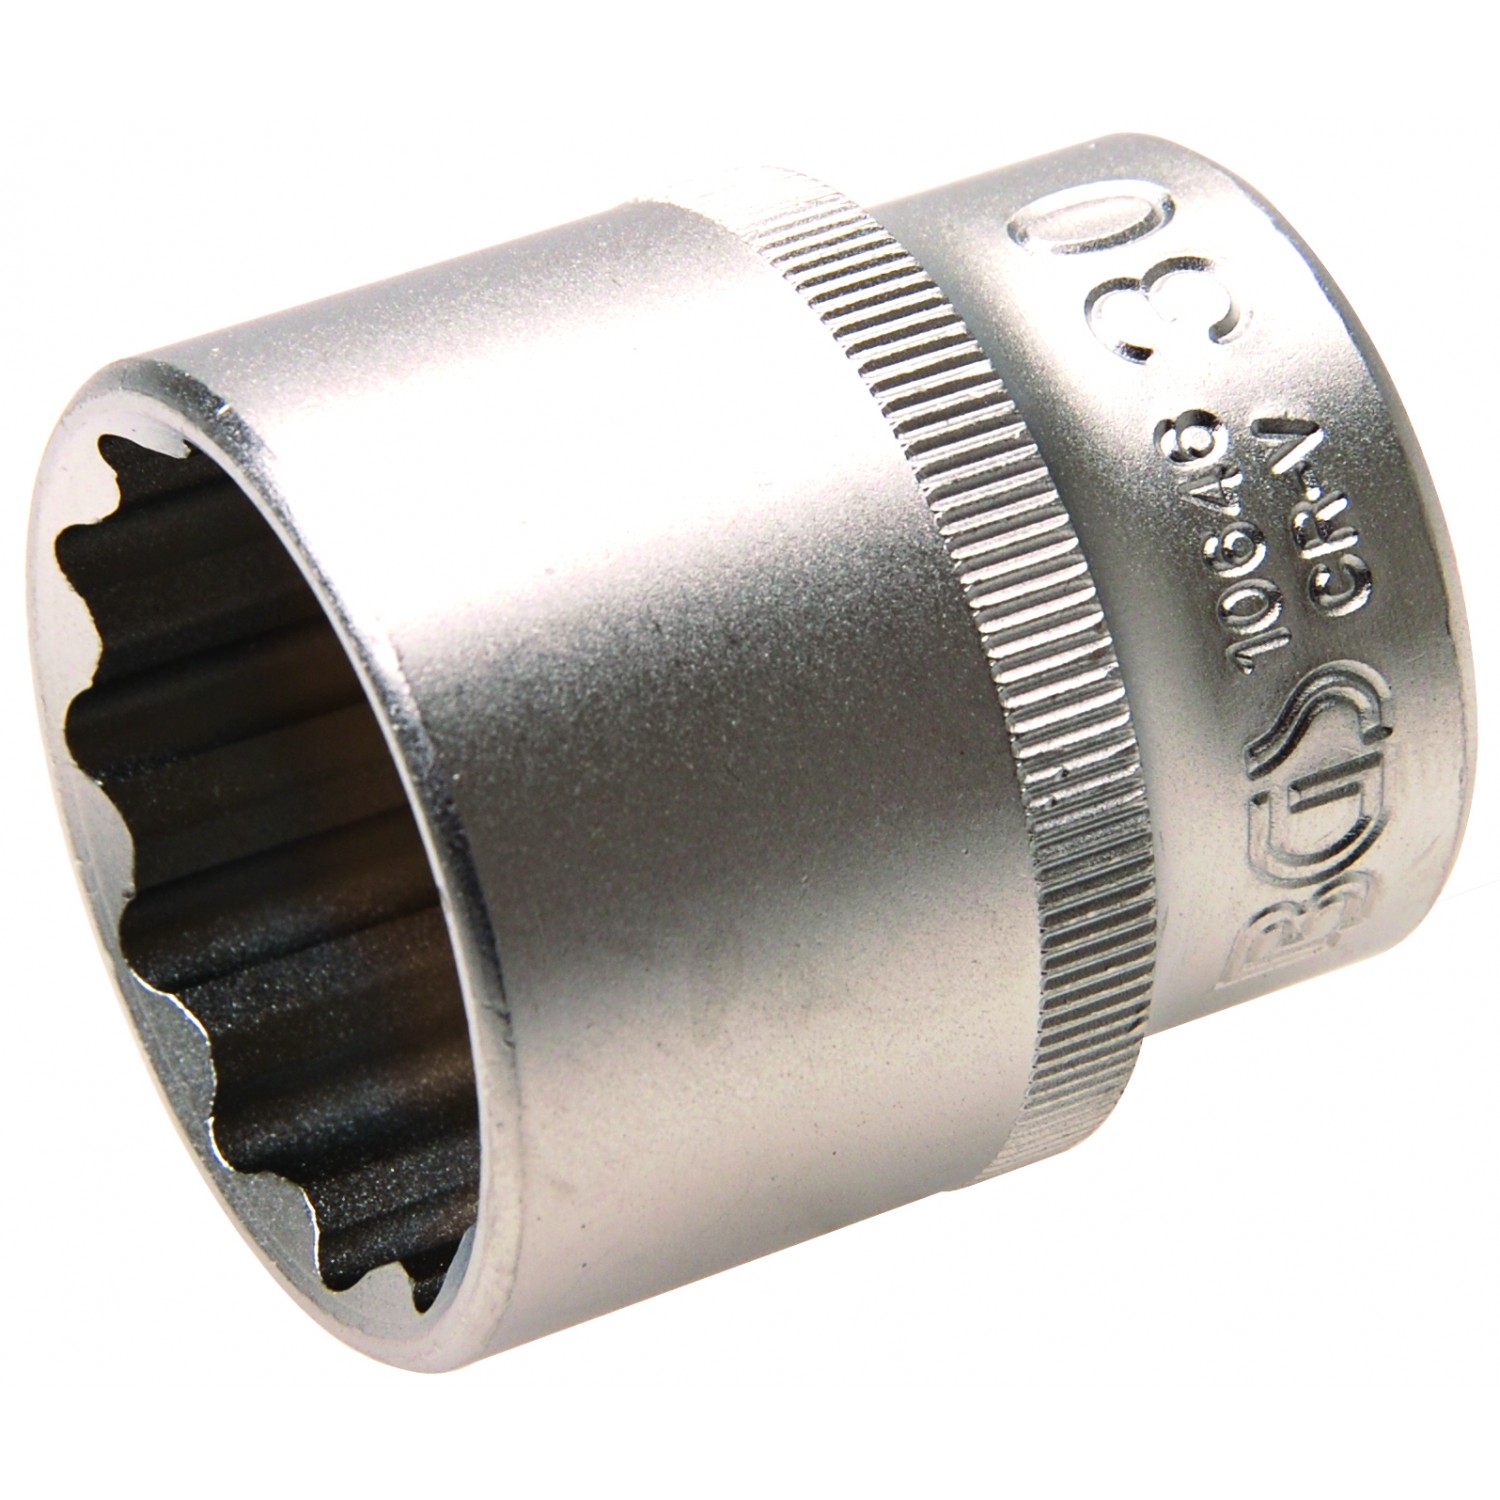 12-point | 12.5 mm (1/2") Drive | 30 mm (10646)